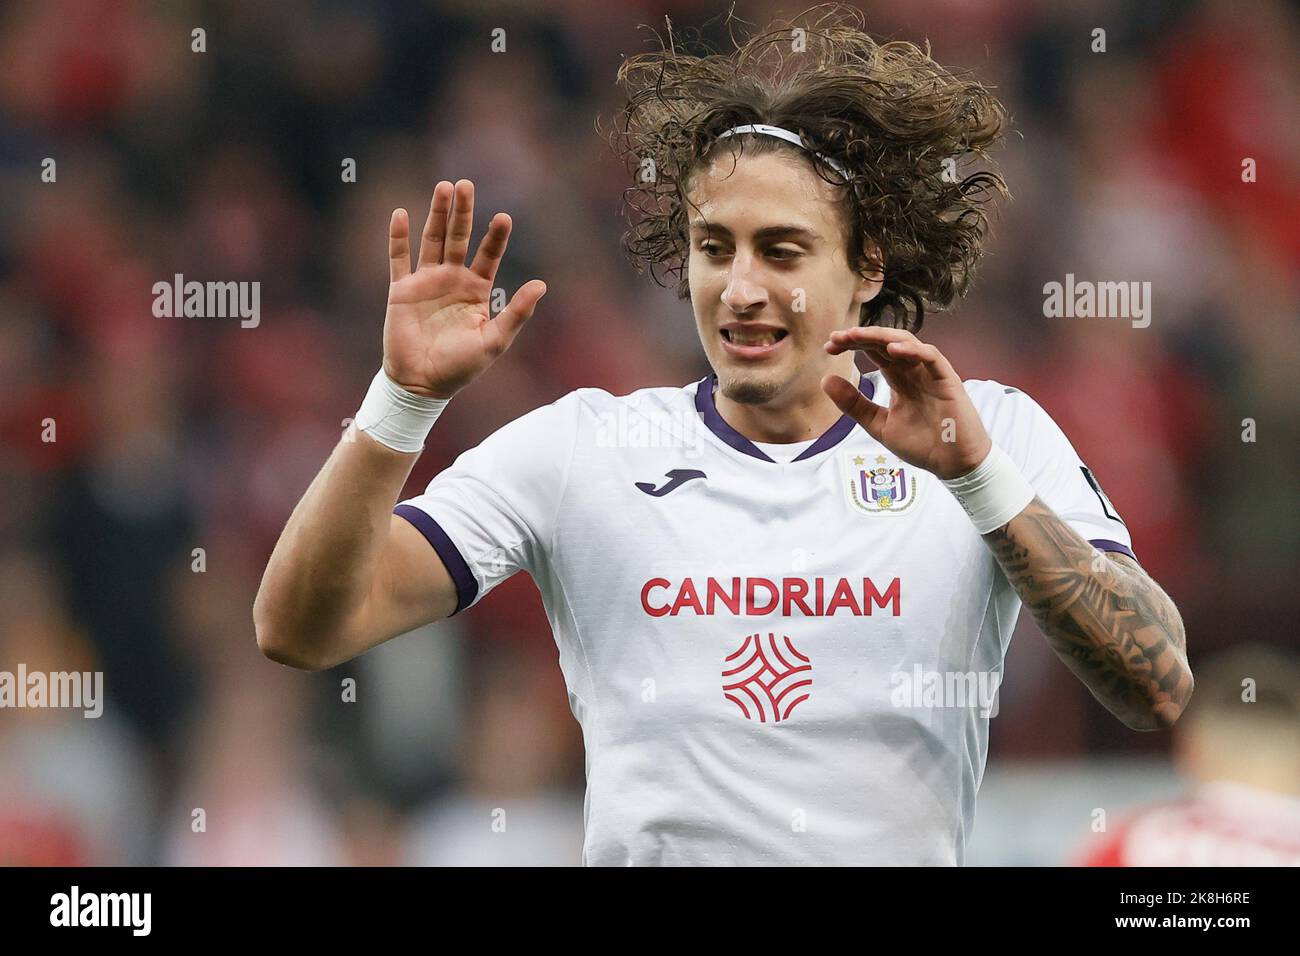 Anderlecht's Fabio Silva celebrates after scoring during a soccer match between Standard de Liege and RSC Anderlecht, Sunday 23 October 2022 in Liege, on day 14 of the 2022-2023 'Jupiler Pro League' first division of the Belgian championship. BELGA PHOTO BRUNO FAHY Stock Photo